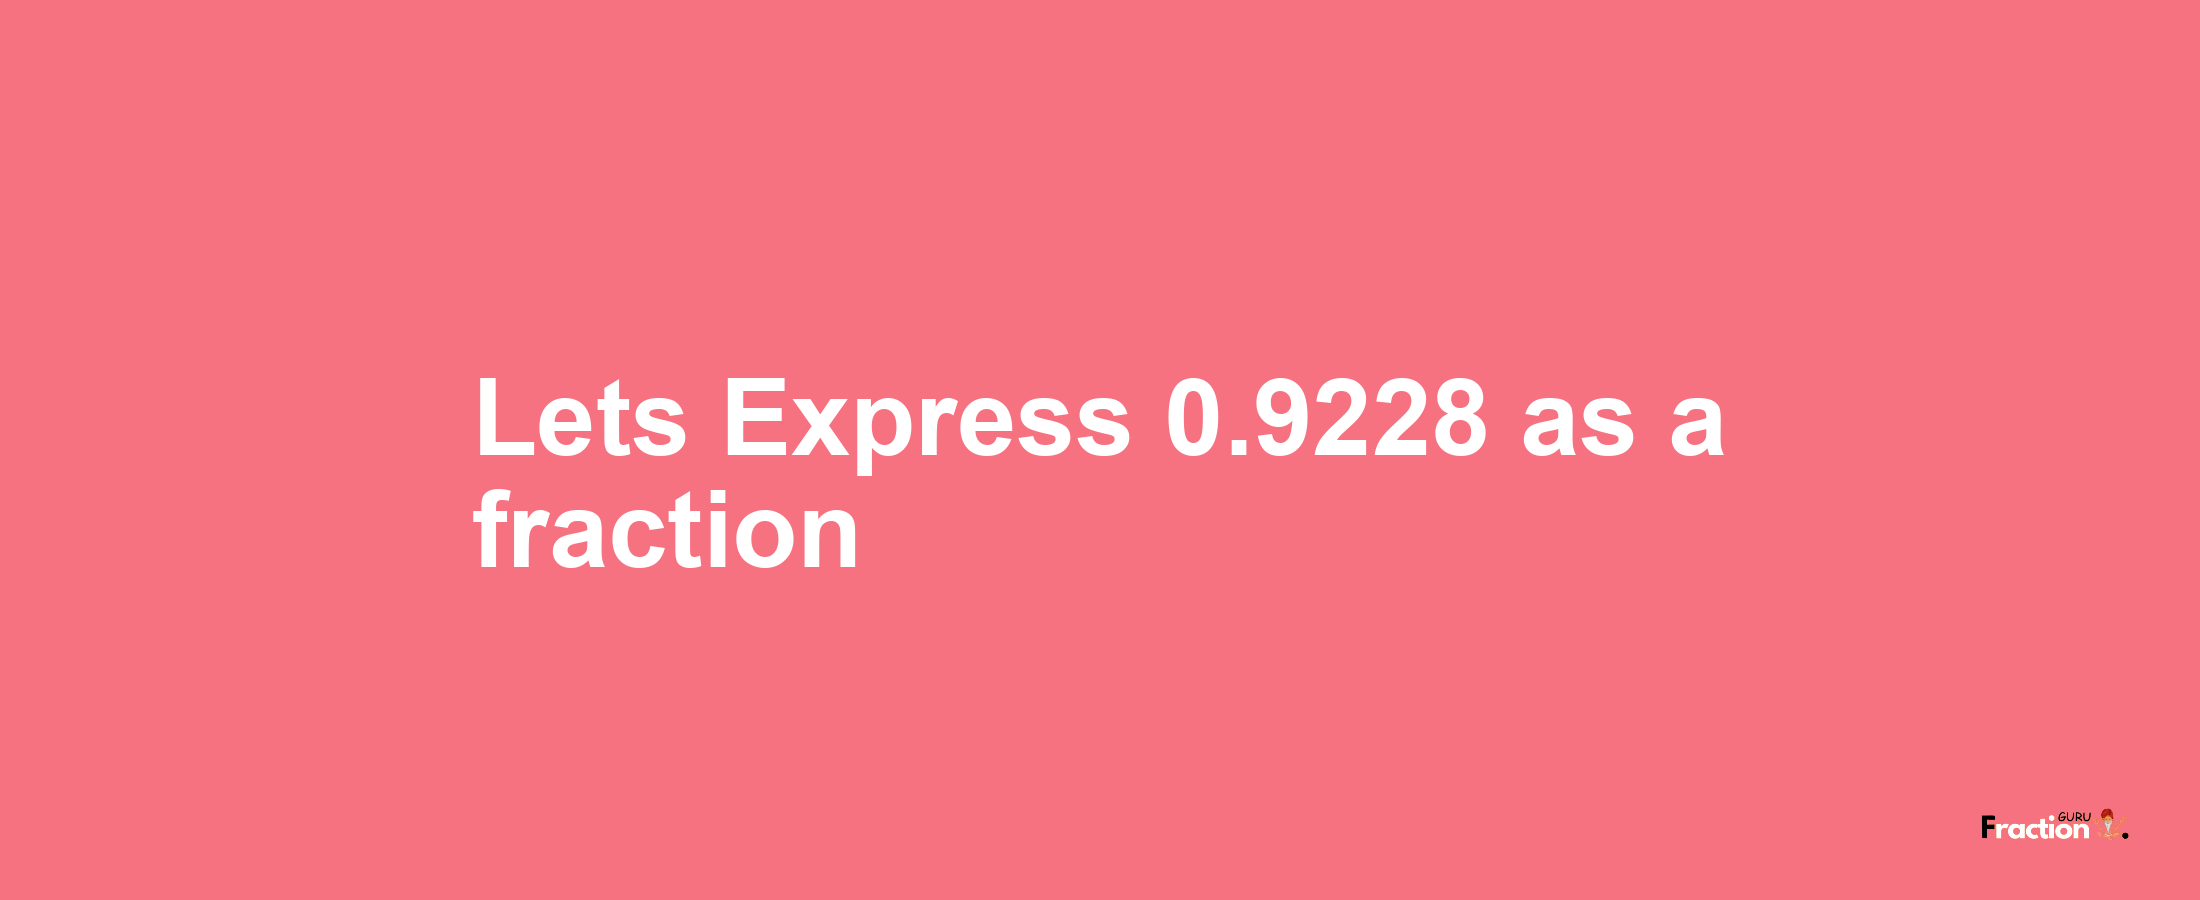 Lets Express 0.9228 as afraction